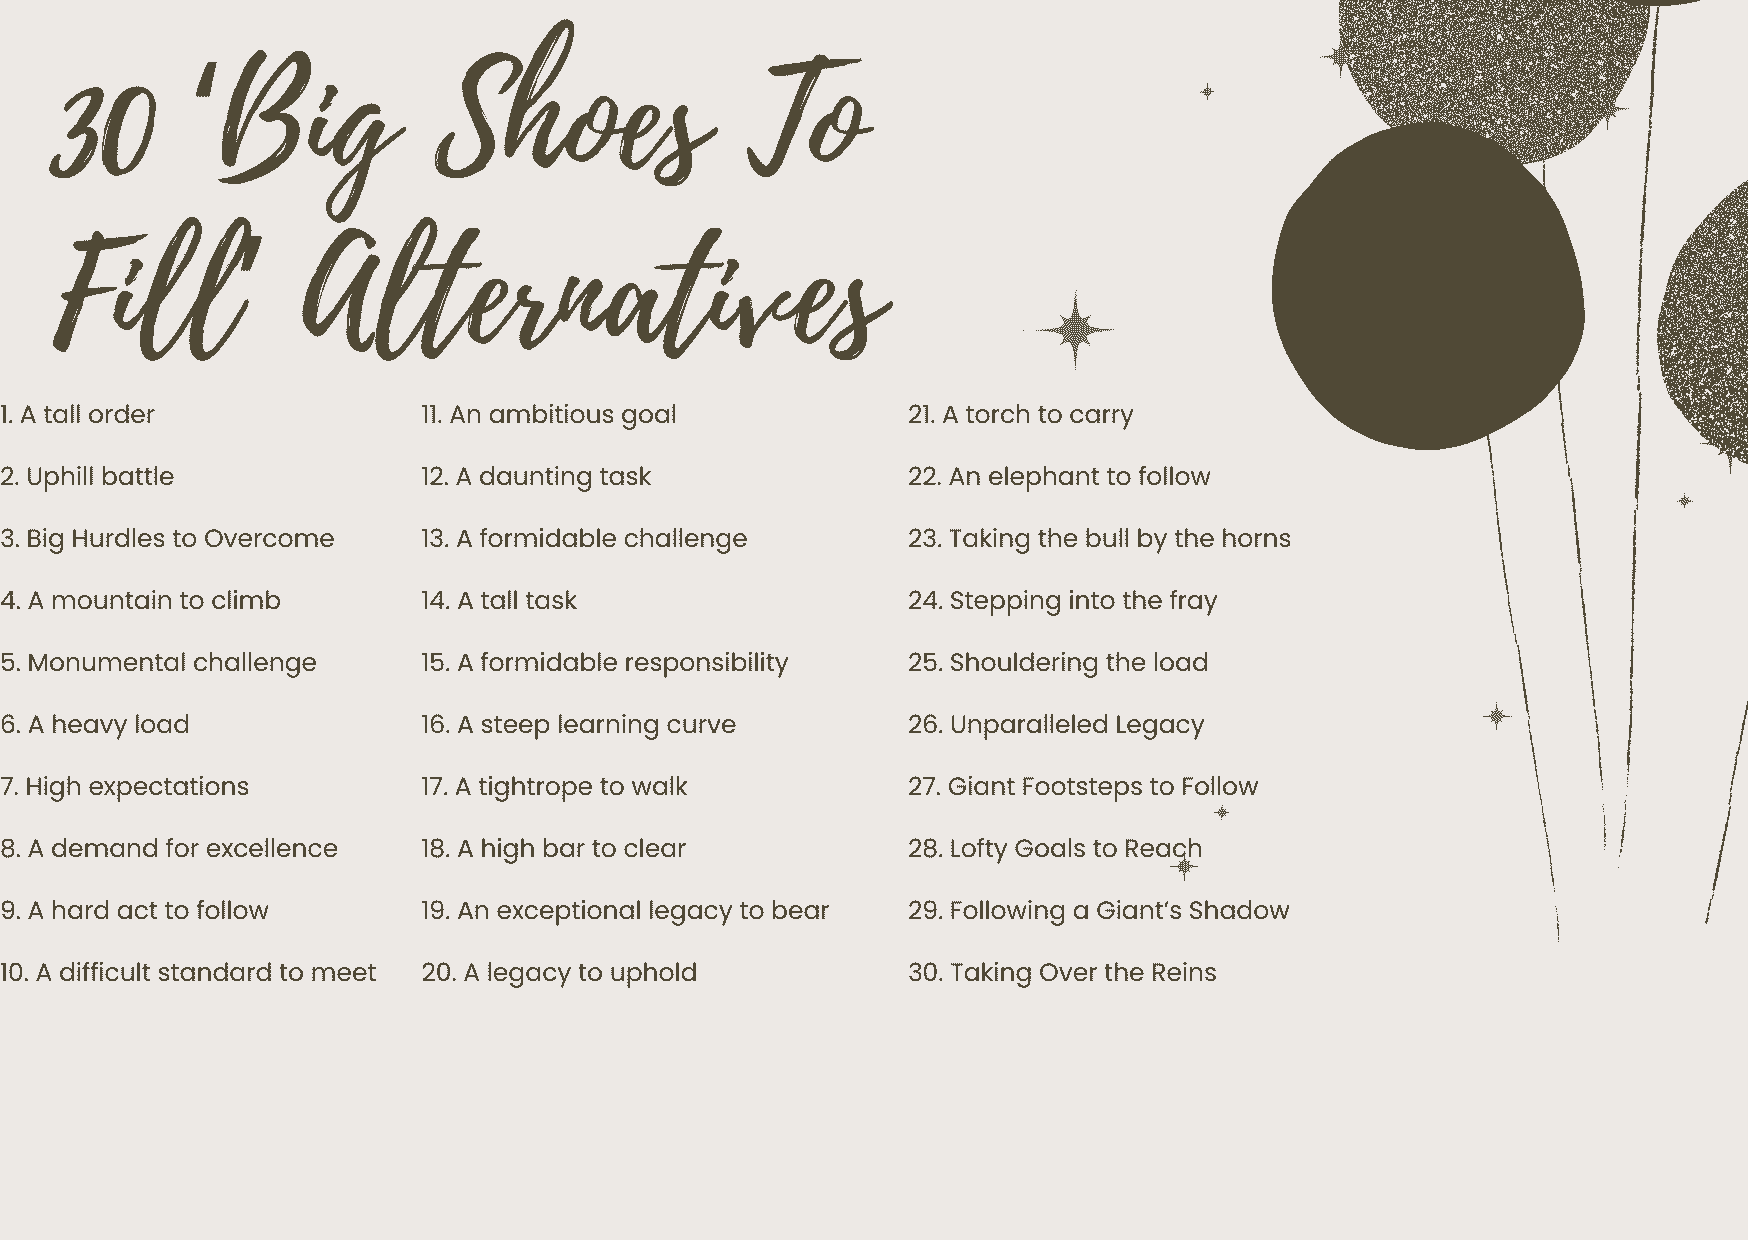 ‘Big Shoes To Fill’ Alternatives